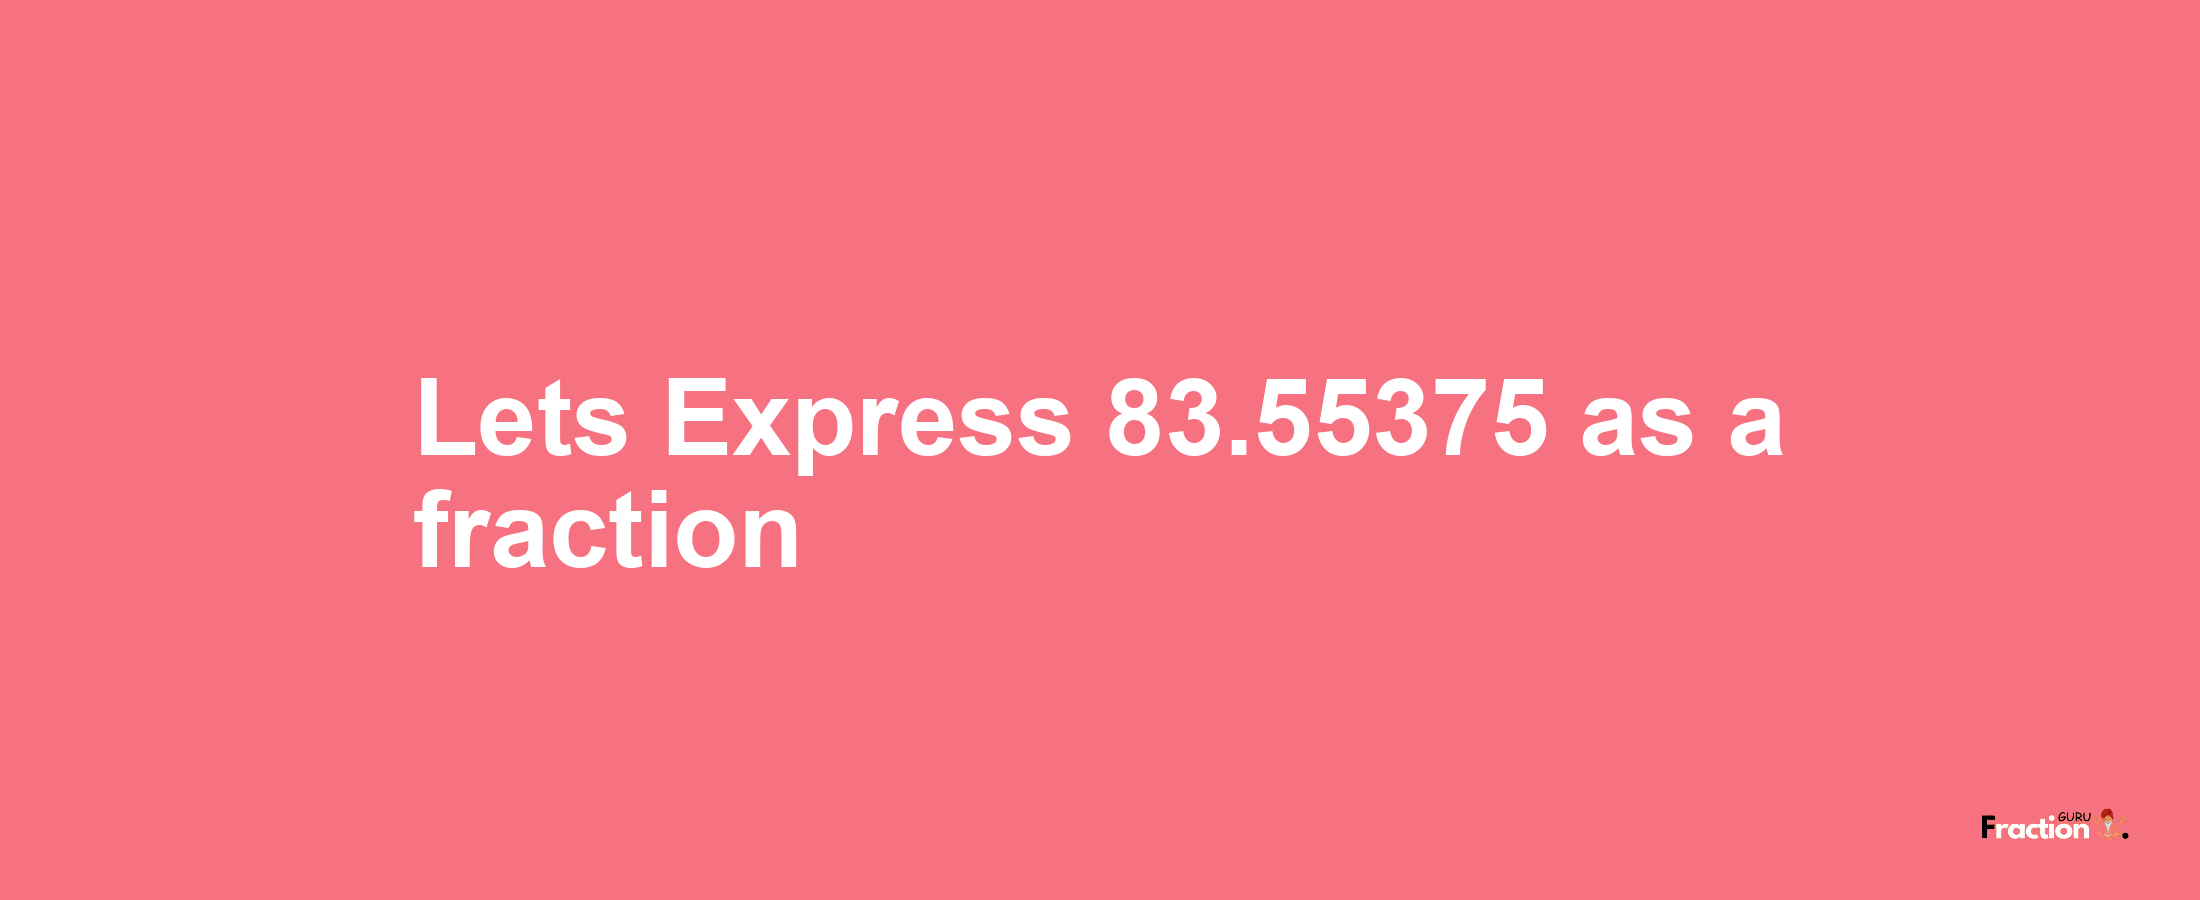 Lets Express 83.55375 as afraction